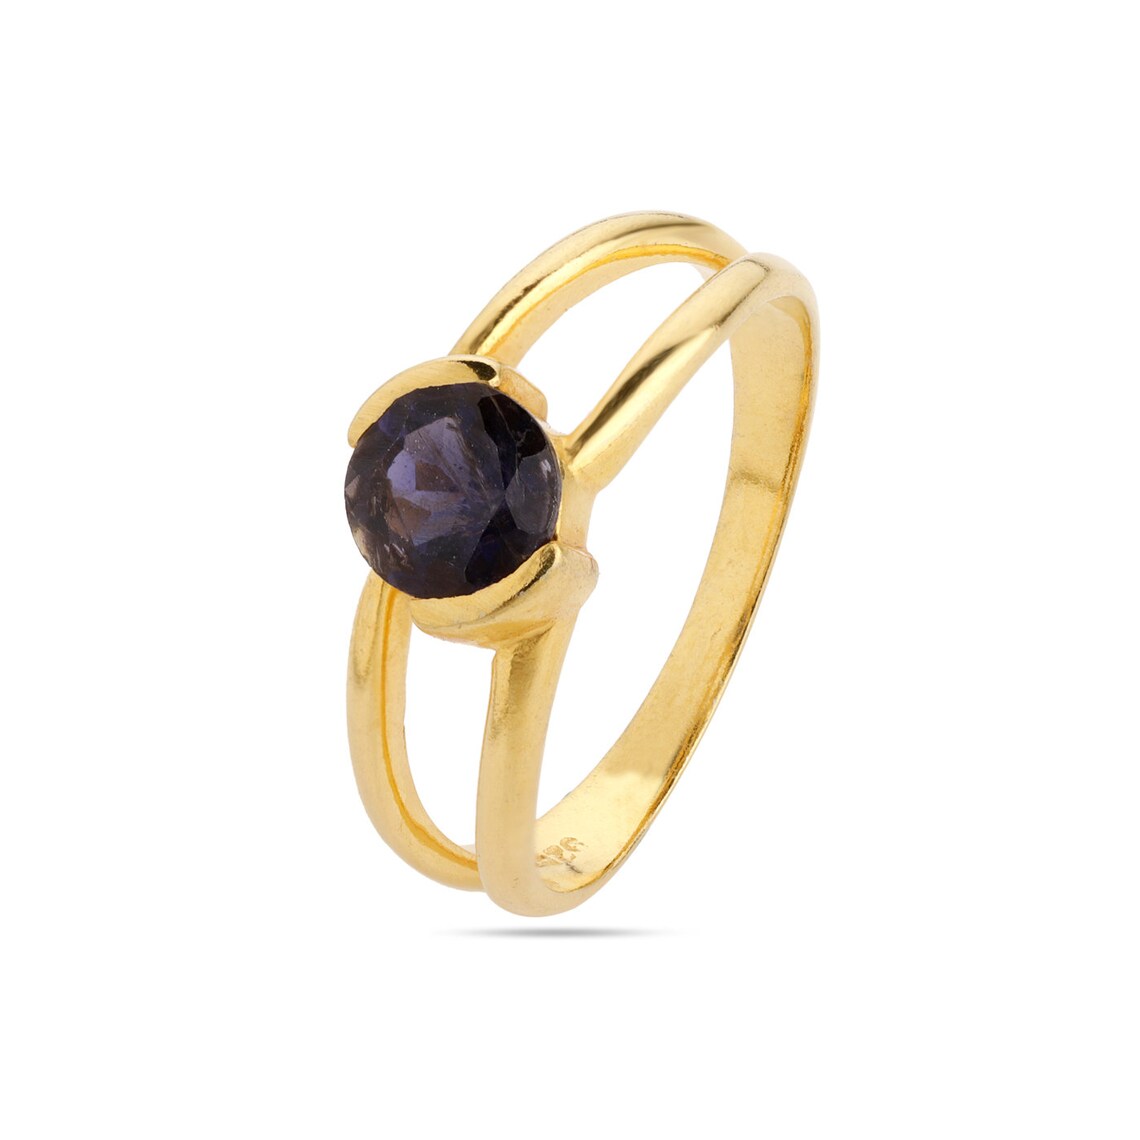 Round Iolite Gold Ring, Blue Iolite Gemstone Ring, Double Band Ring, 925 Sterling Silver Iolite Ring, Blue Iolite Ring